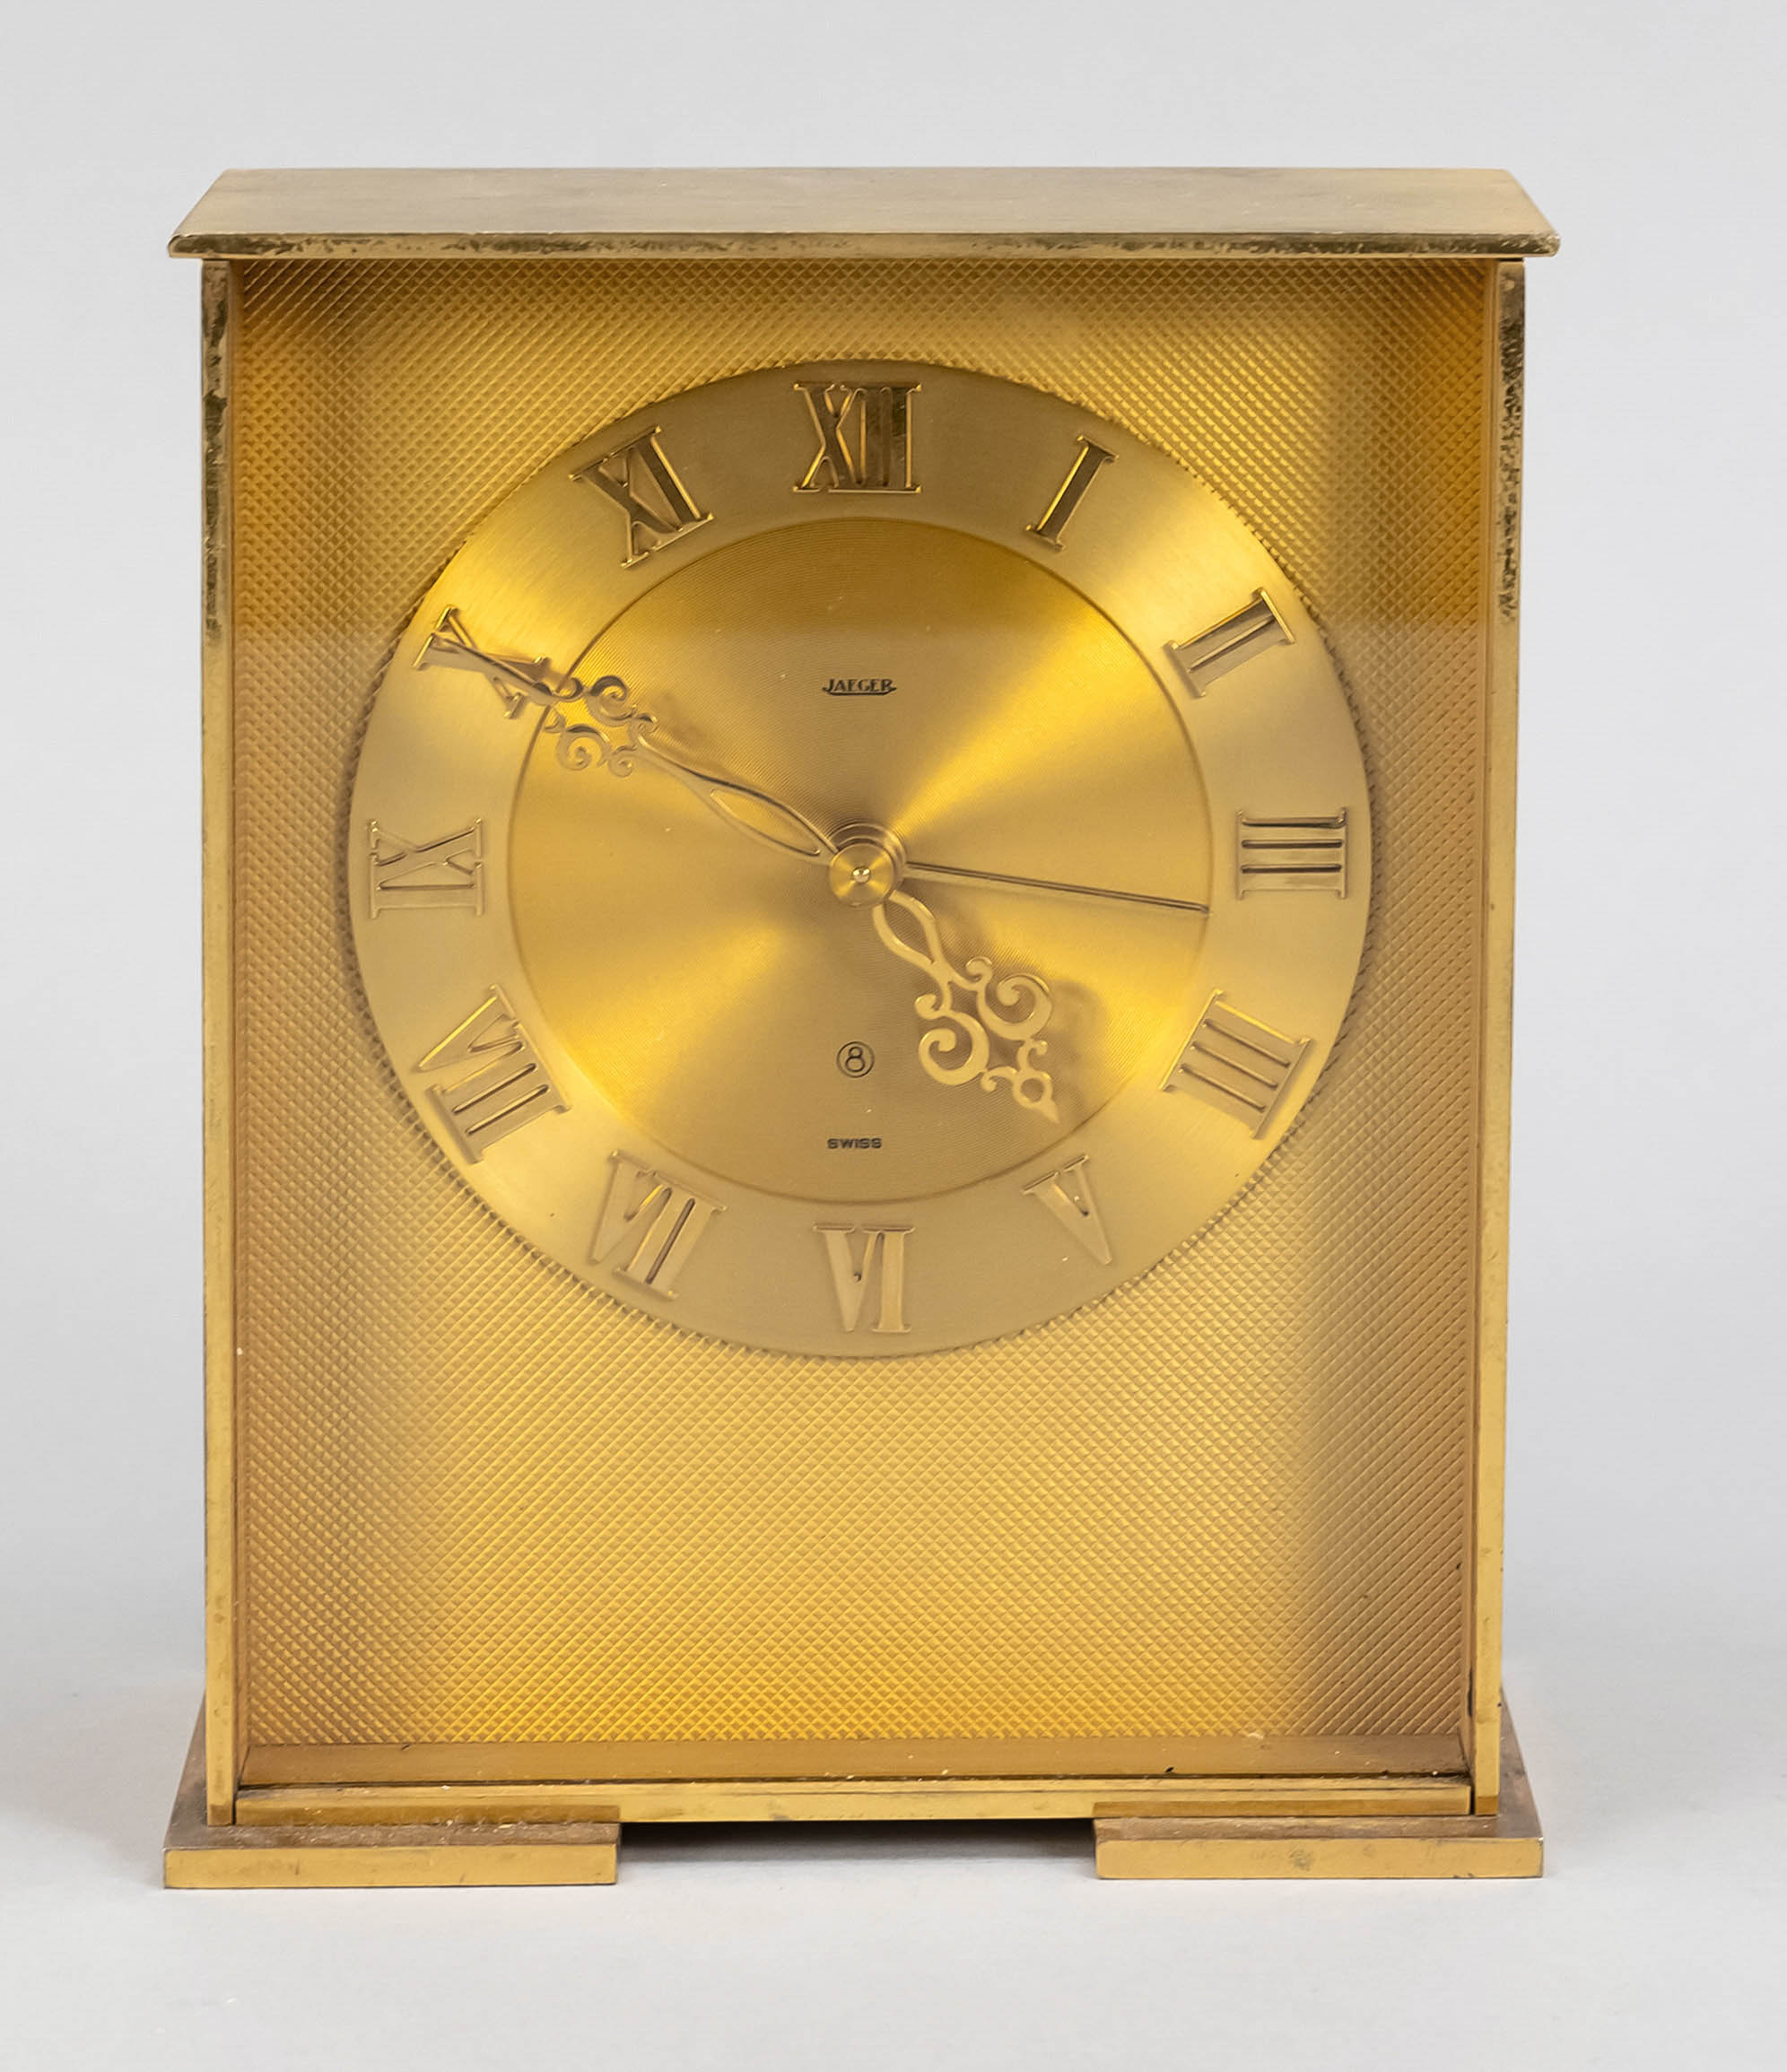 Jaeger ( later Jaeger LeCoultre ) table clock, solid brass gold plated, around 1970, with music